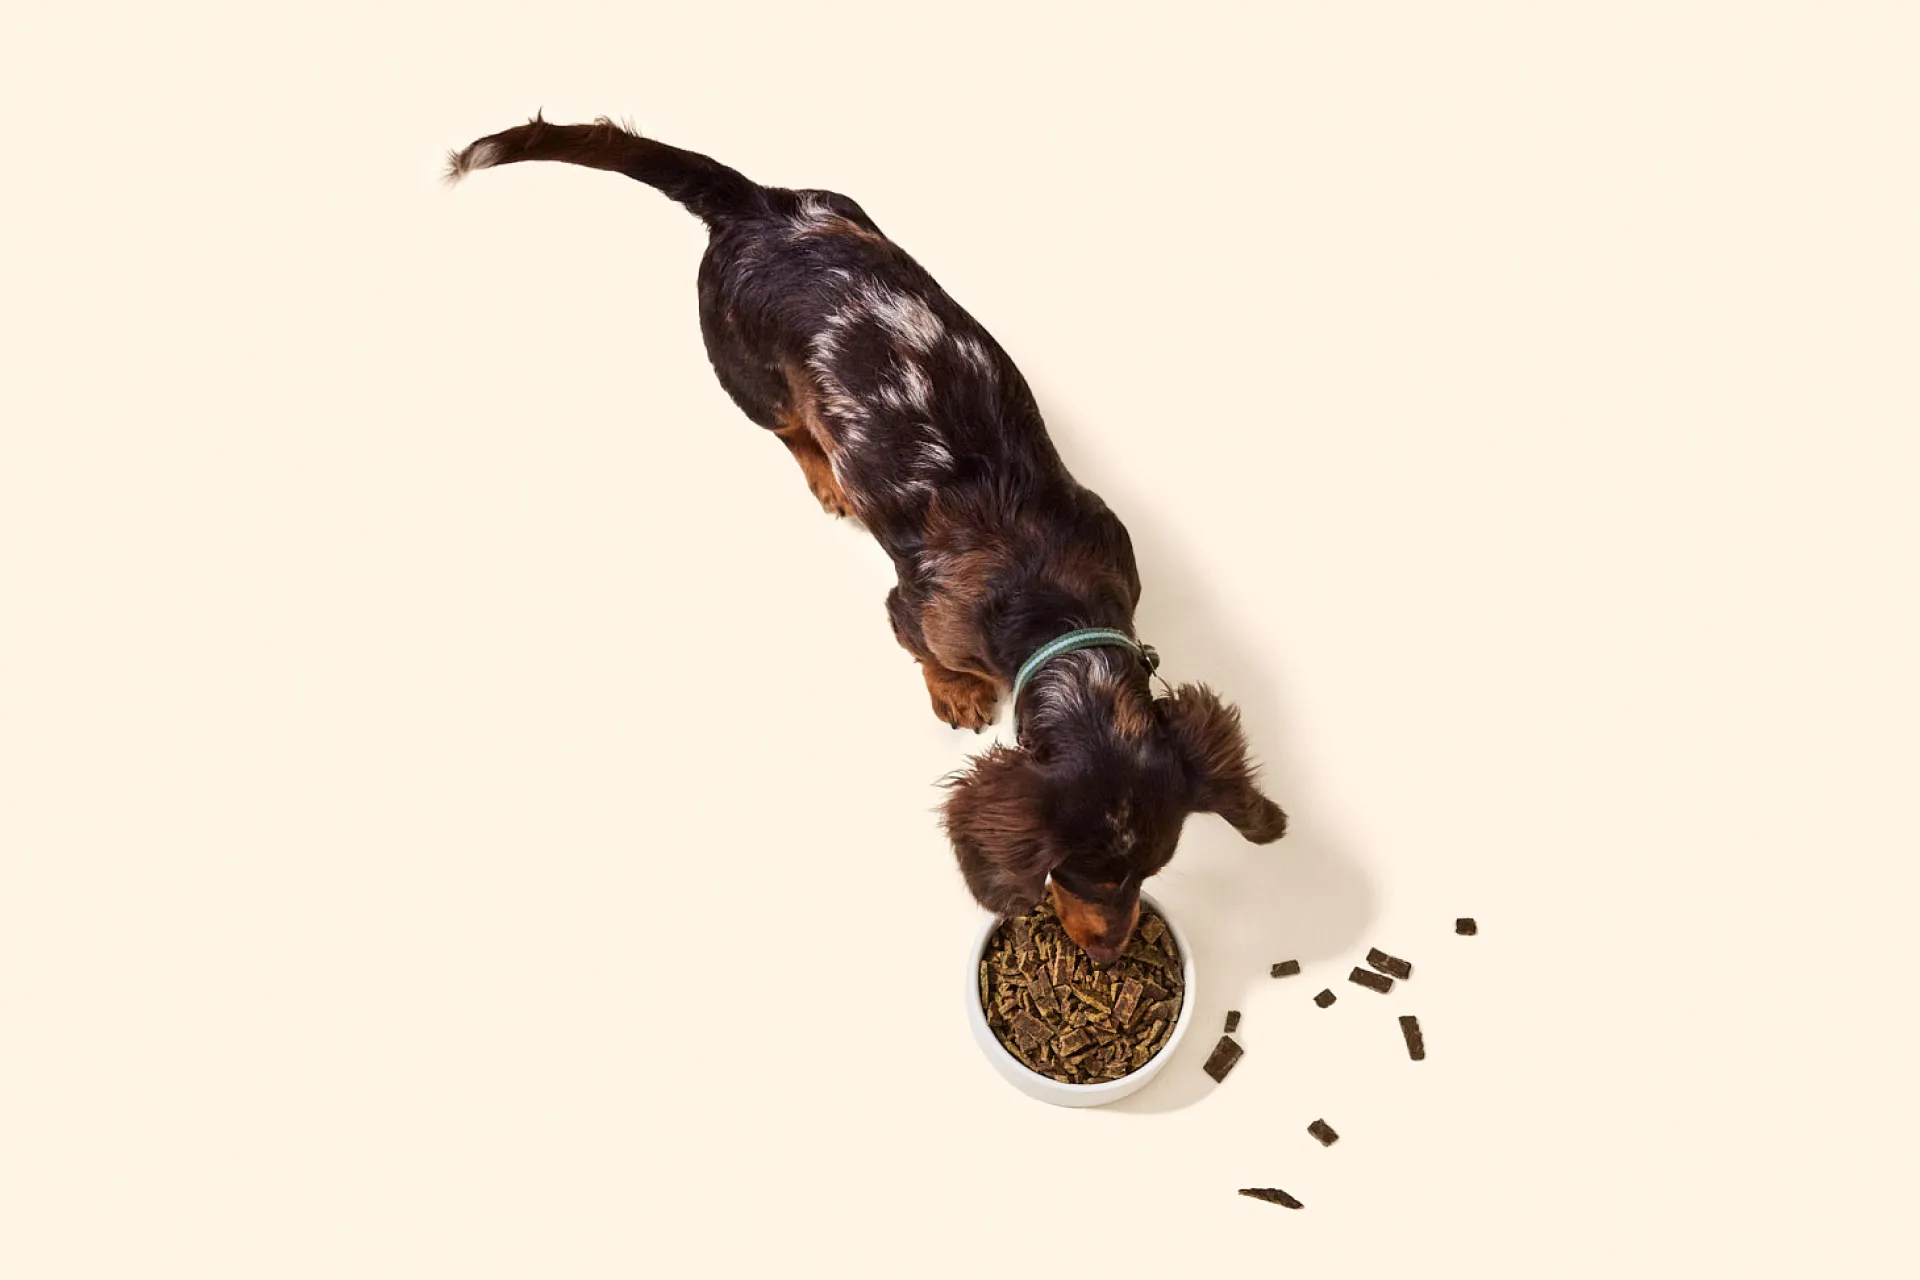 Miniature Dachshund eating from a bowl of Sundays beef dog food